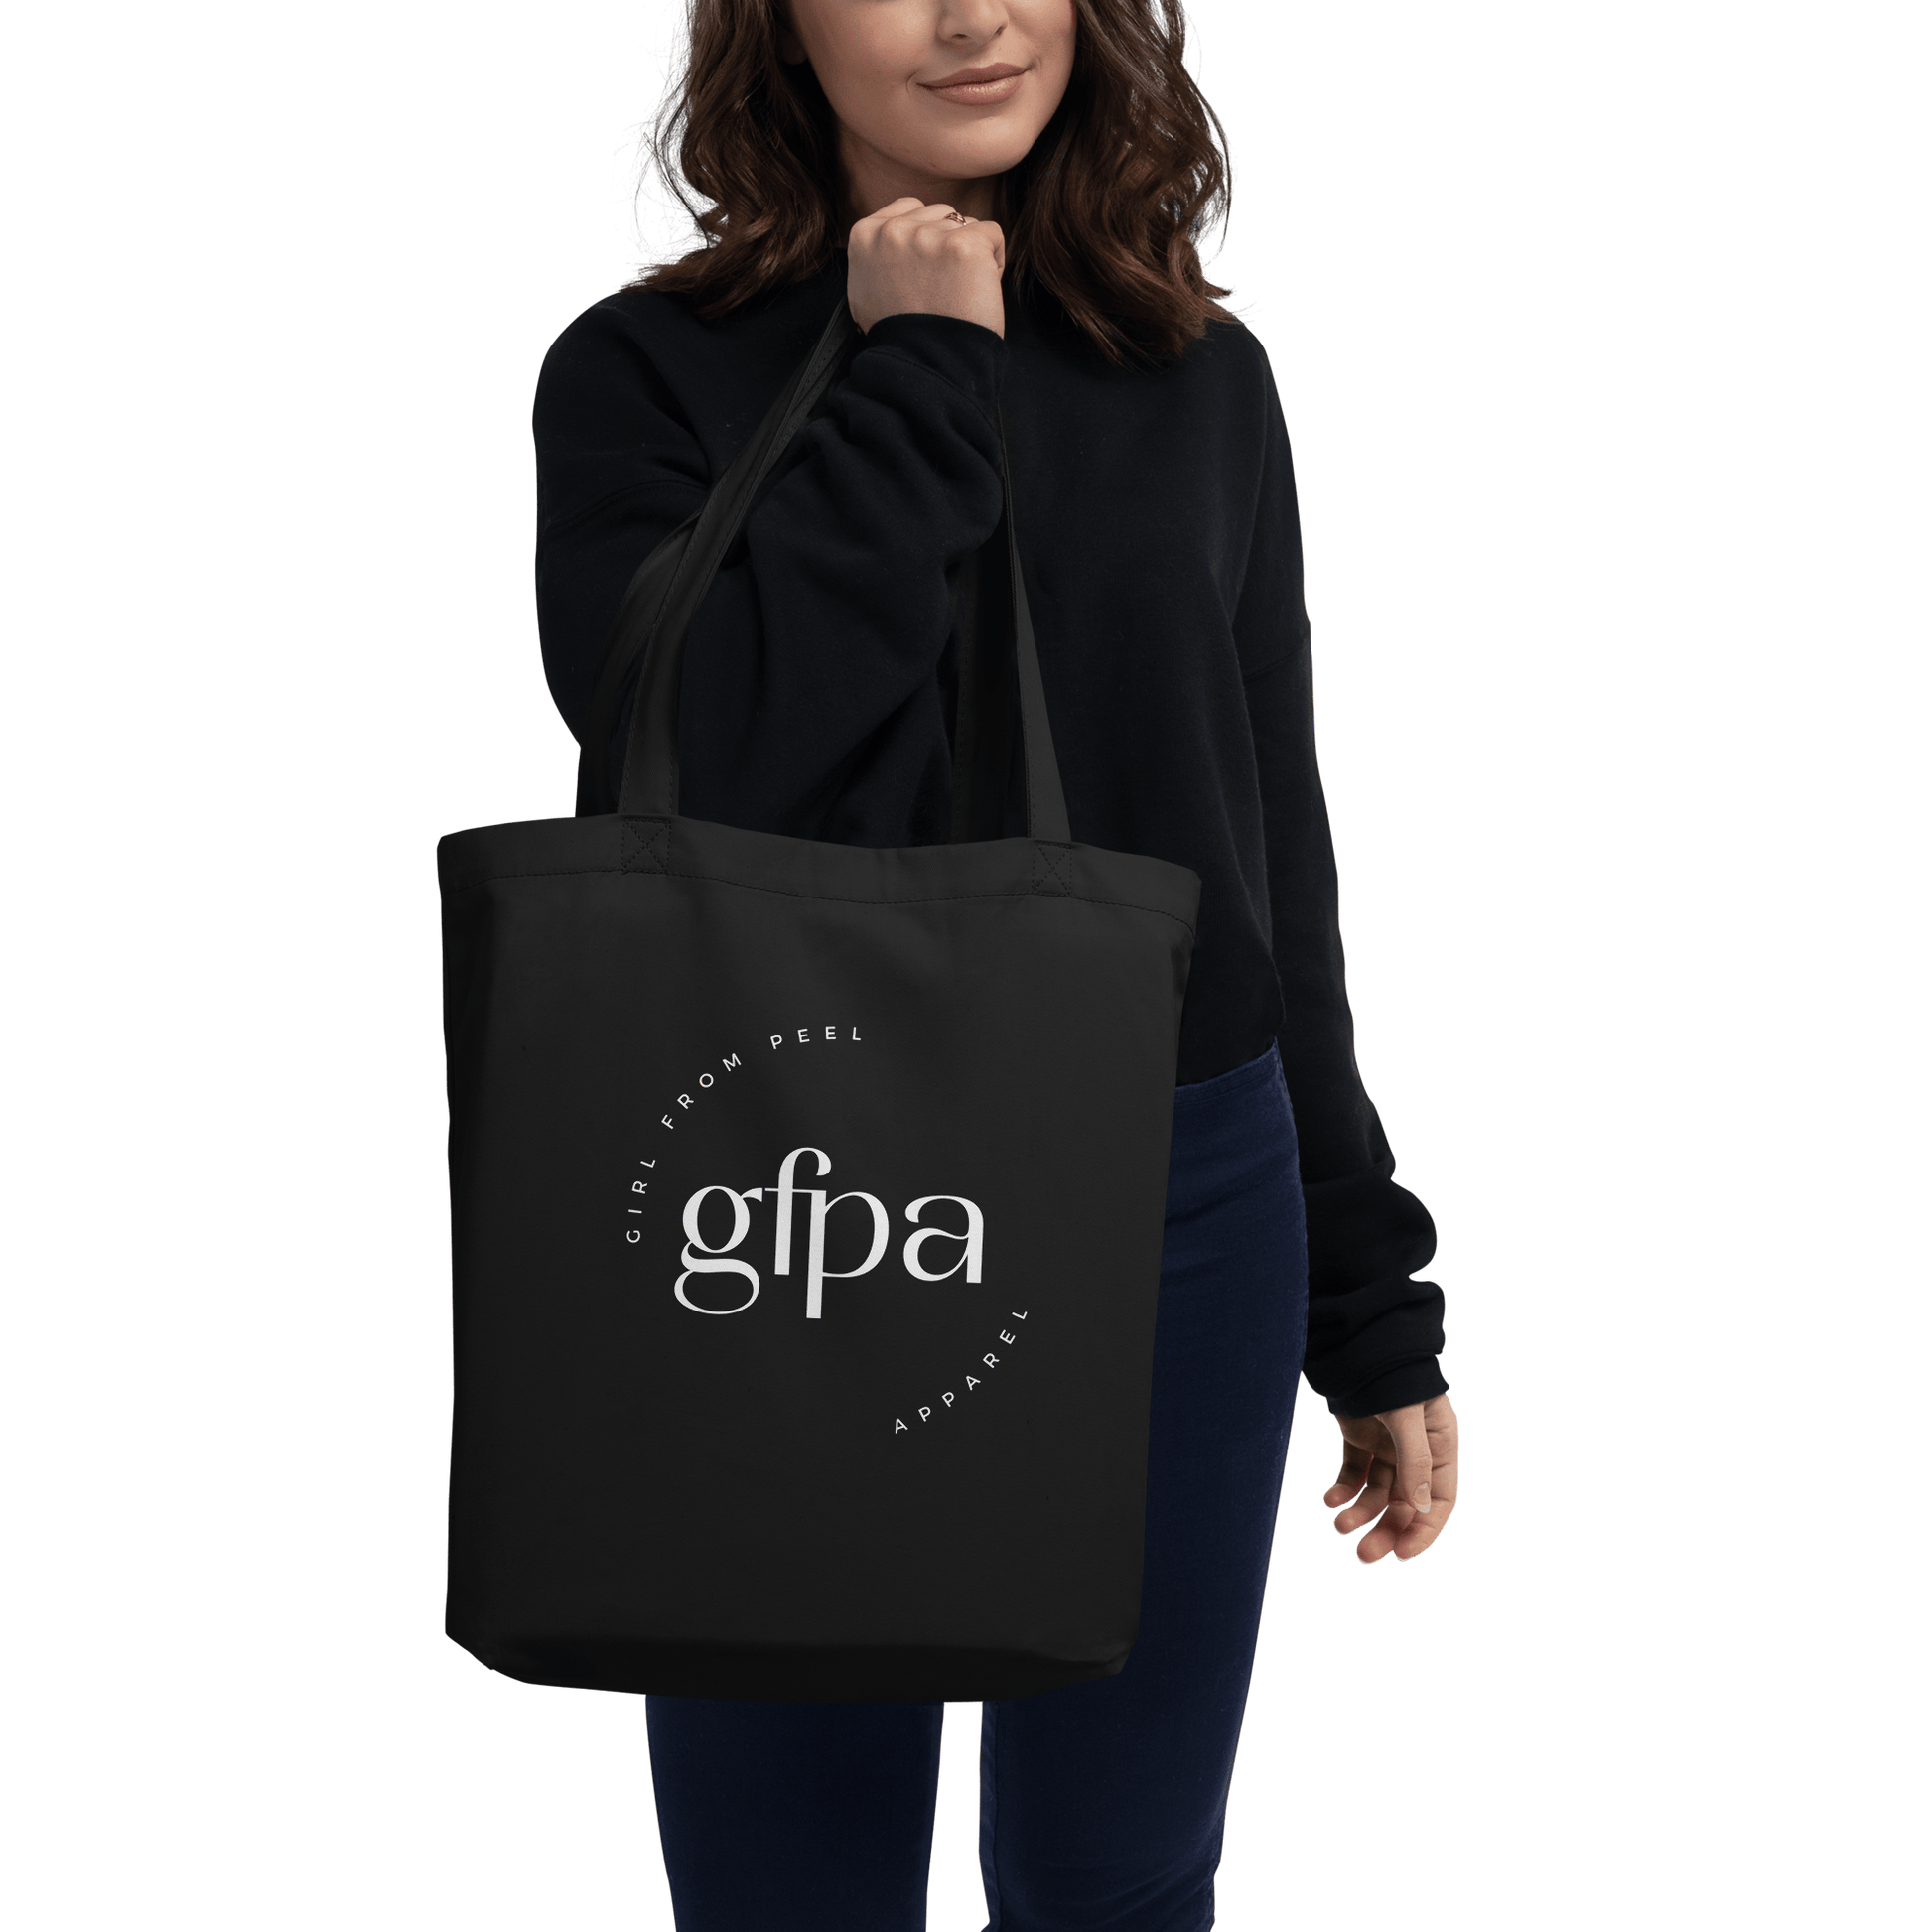 GFPA Eco Tote Bag - Girl From Peel Apparel - Tote